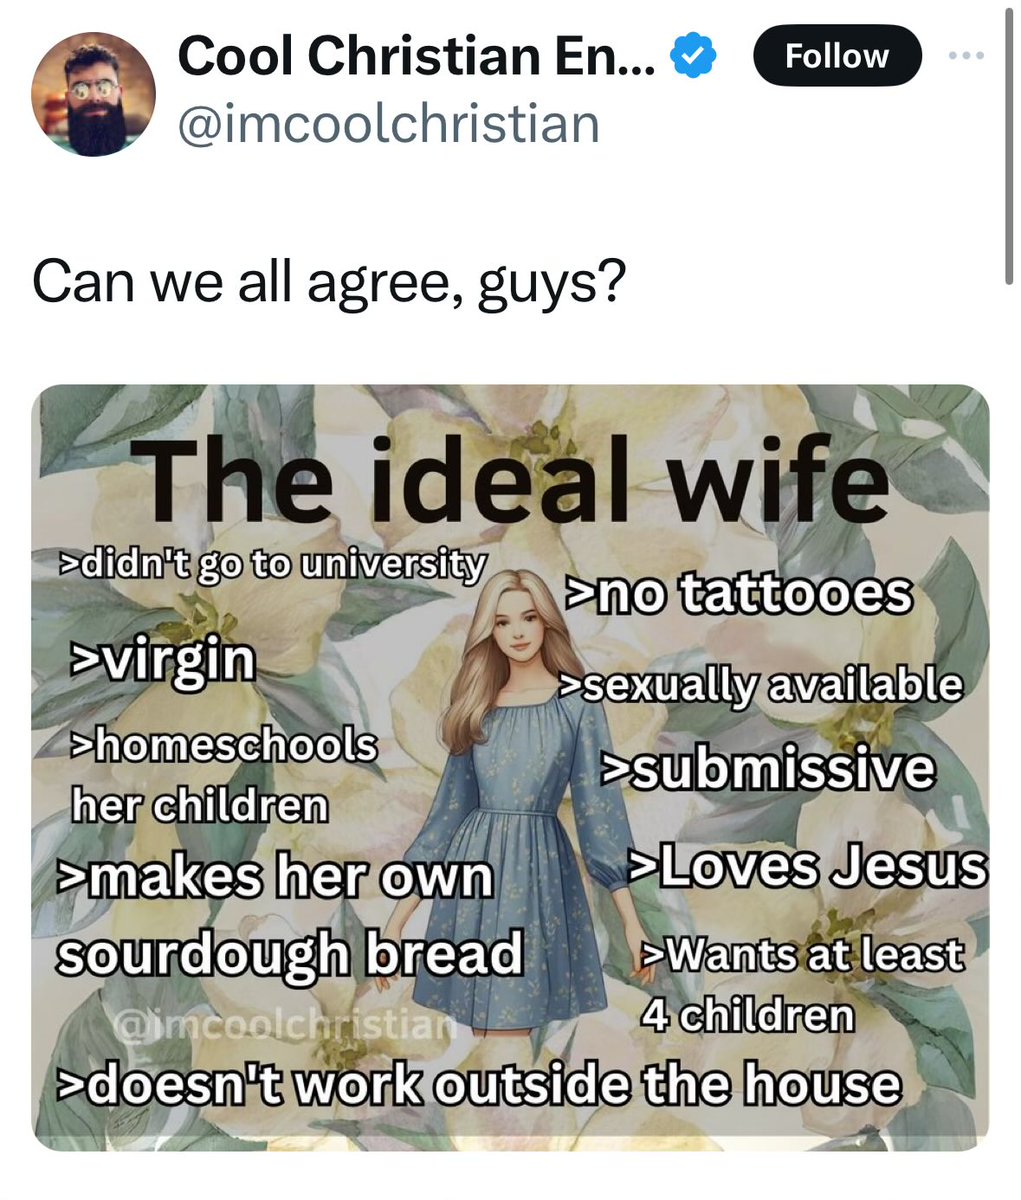 A virgin, sexually available and submissive? Everything that is wrong with religion in one meme. Great evidence that Christianity, like most other religions, is a wet dream of the patriarchy, a male power fantasy, a tool to oppress women. Religion is inherently misogynistic.